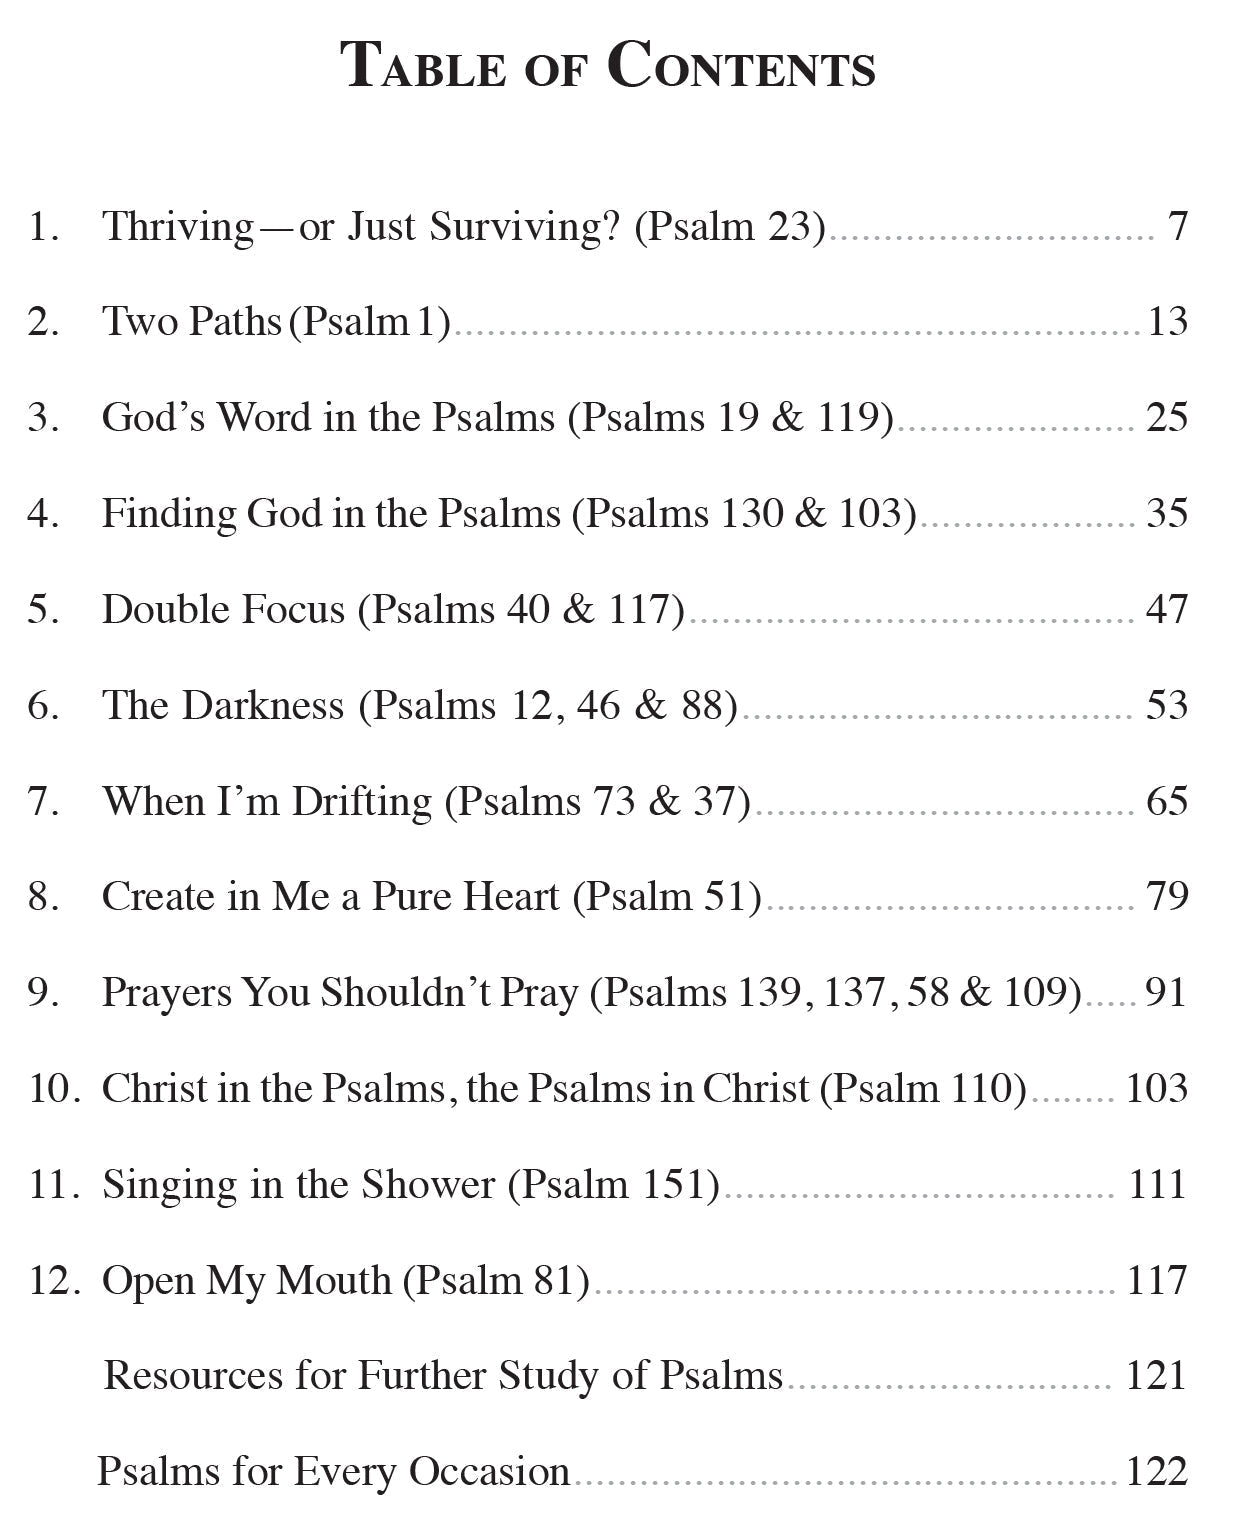 THRIVE! - Using Psalms to Help You Flourish - Title